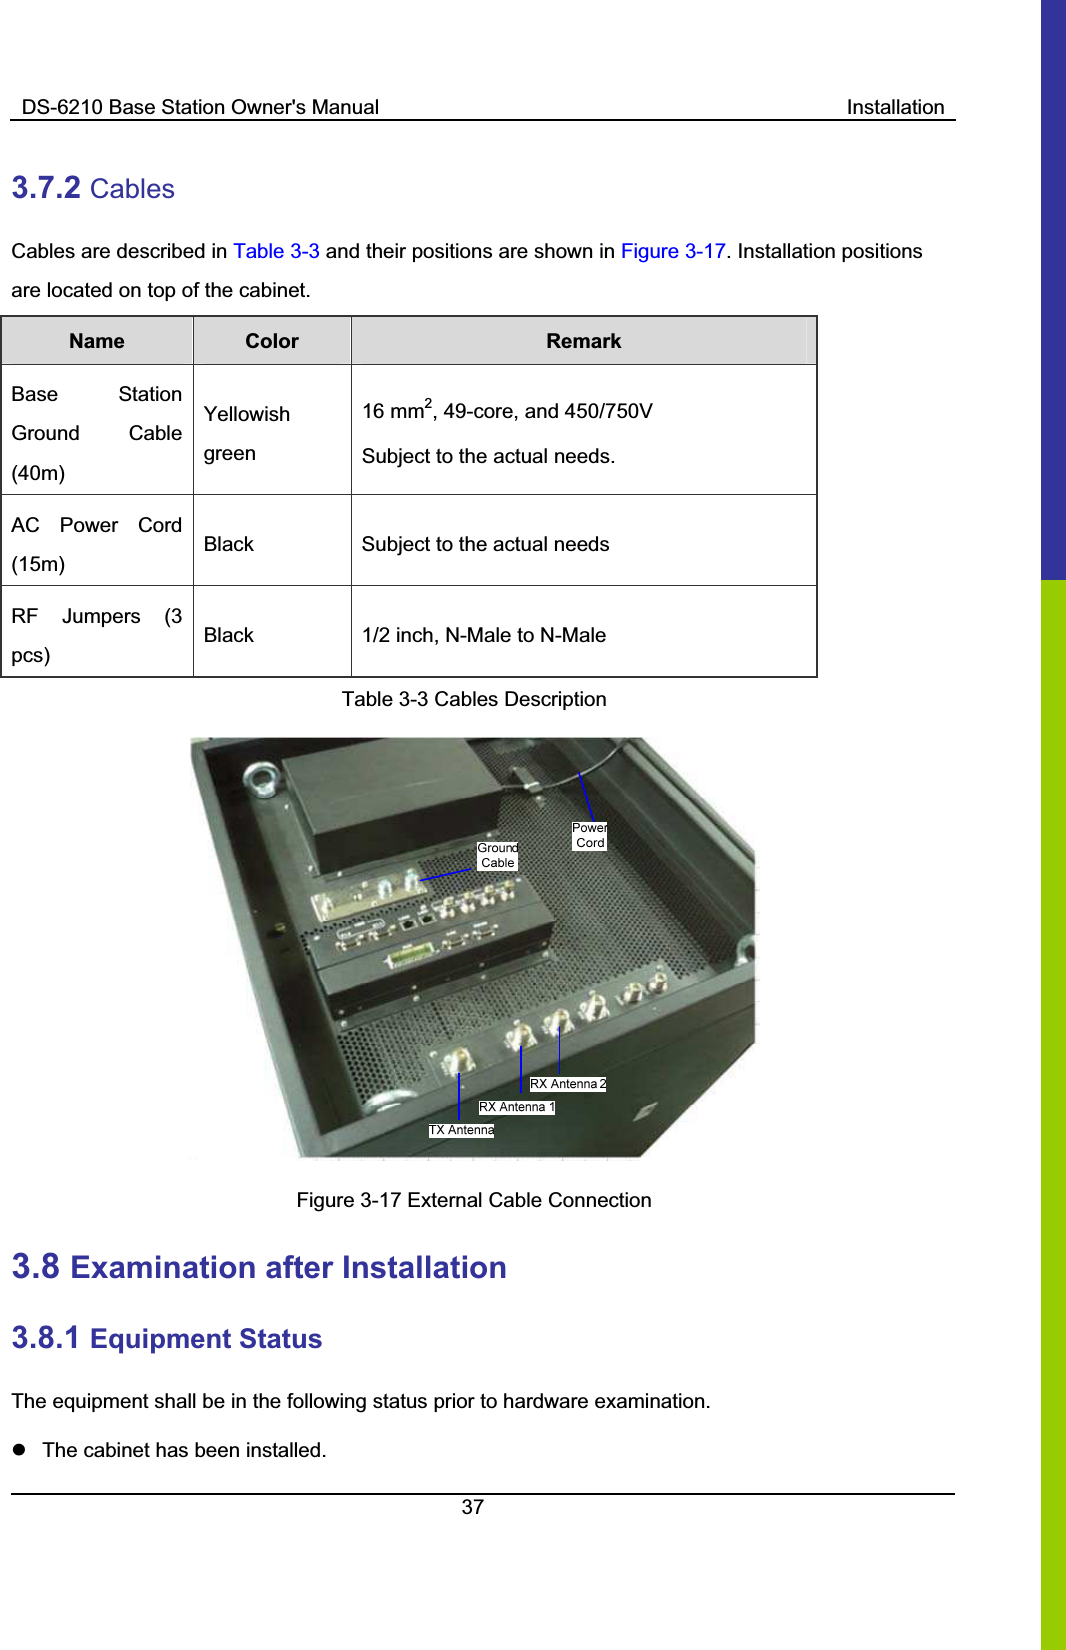 DS-6210 Base Station Owner&apos;s Manual  Installation373.7.2 CablesCables are described in Table 3-3 and their positions are shown in Figure 3-17. Installation positions are located on top of the cabinet. Name    Color Remark   Base  Station Ground  Cable (40m)Yellowishgreen 16 mm2, 49-core, and 450/750V Subject to the actual needs.   AC  Power  Cord (15m)Black  Subject to the actual needs RF  Jumpers  (3 pcs)Black  1/2 inch, N-Male to N-Male Table 3-3 Cables Description   Figure 3-17 External Cable Connection   3.8 Examination after Installation 3.8.1 Equipment Status The equipment shall be in the following status prior to hardware examination.   z  The cabinet has been installed.   